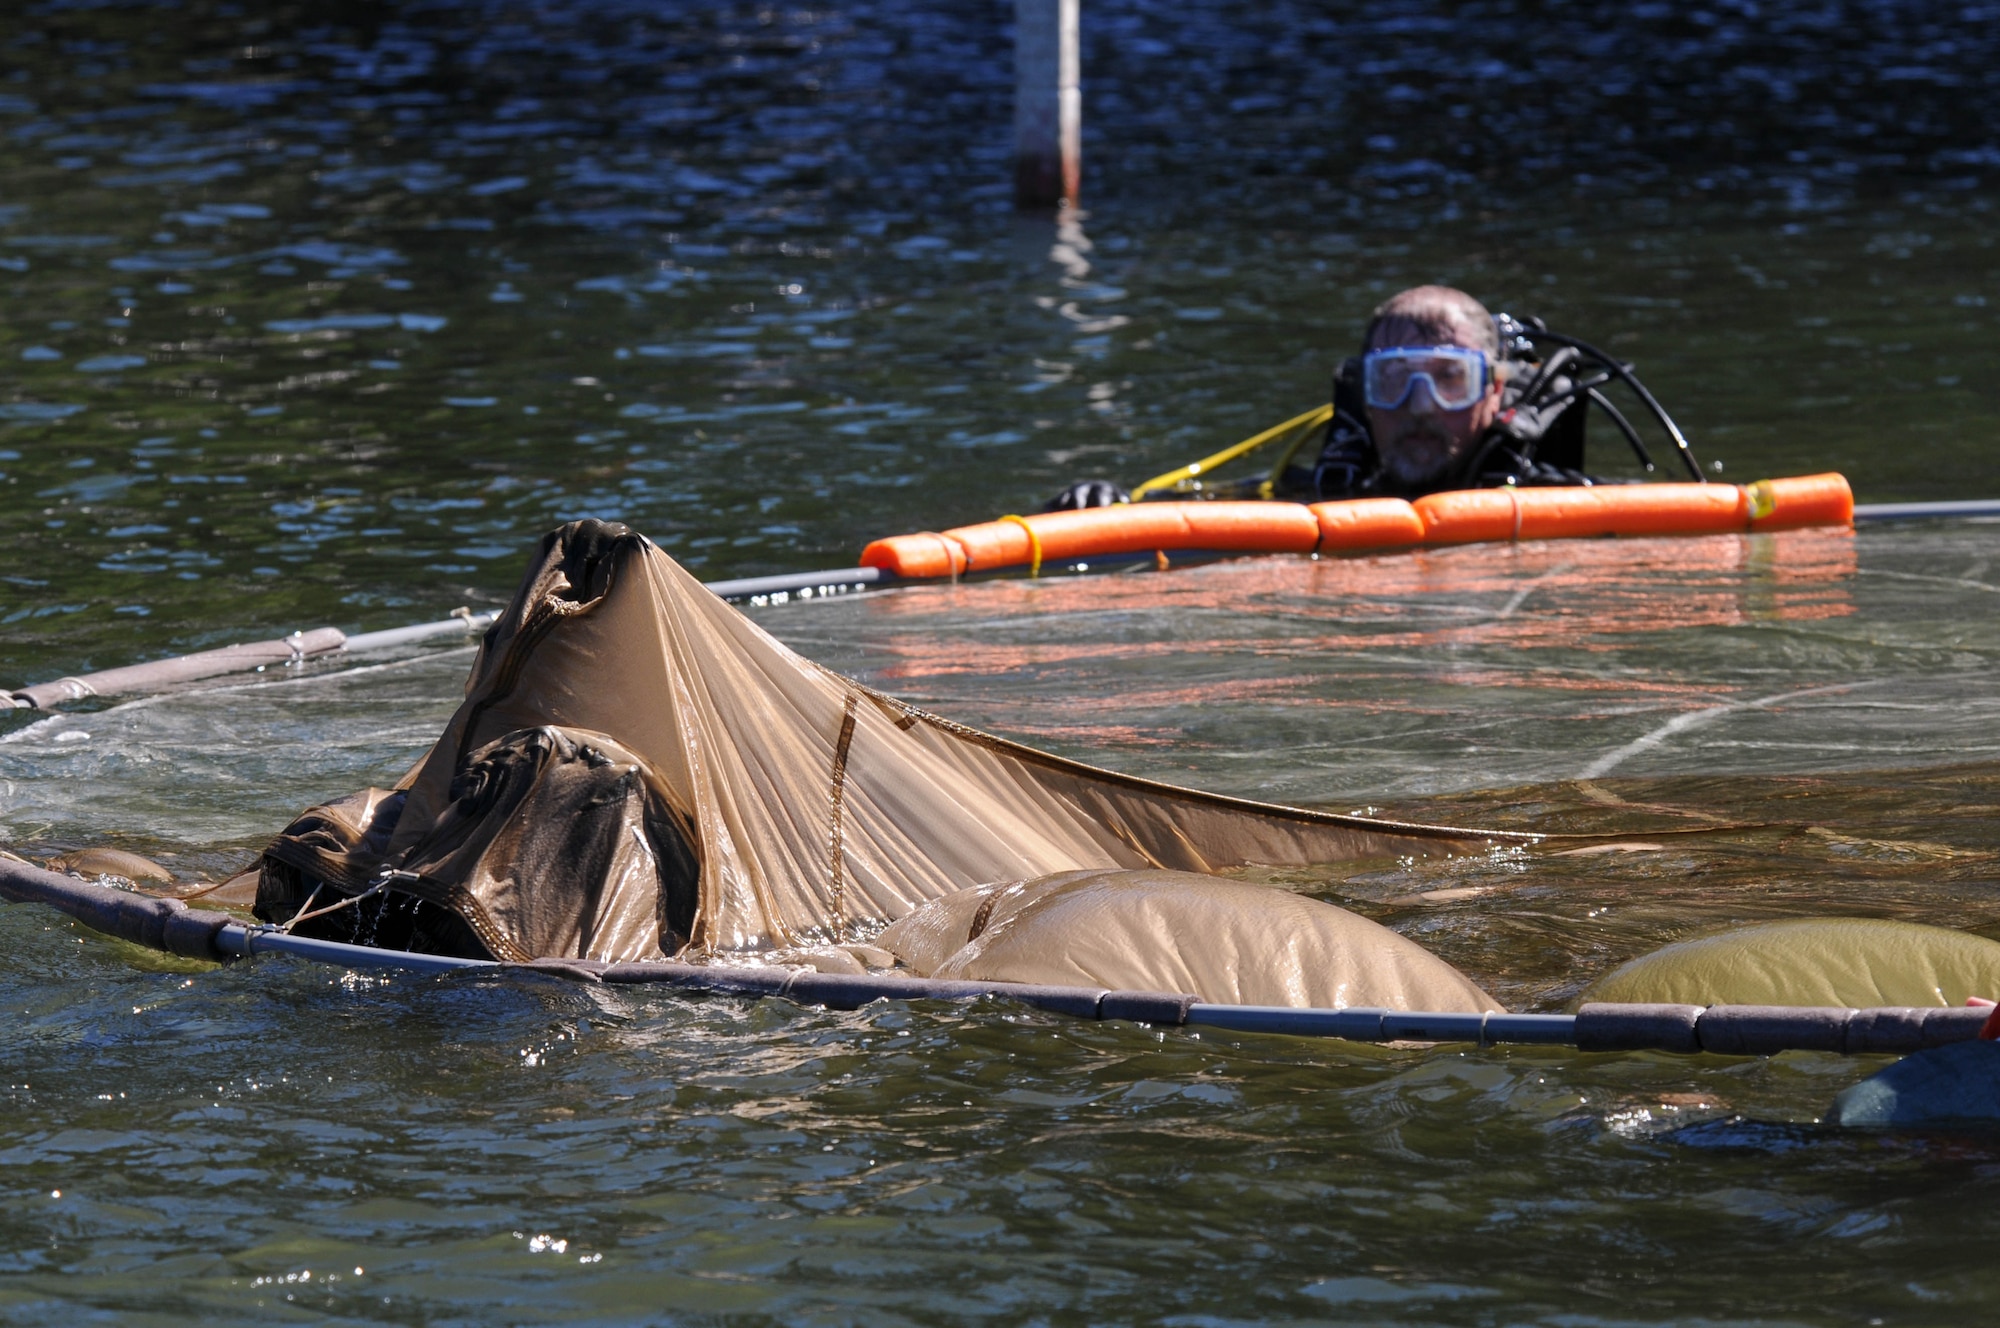 Oregon Air National Guard Maj. Kevin Welch, 114th Fighter Squadron pilot, pulls himself through a water-logged parachute as Capt. Mike Parsons, Klamath Sheriff Dive Rescue, supervises during water survival training at Lake of the Woods near Klamath Falls, Ore., July 22, 2016. Aircrew Flight Equipment members joined with Klamath County Sheriff's Department agencies and members of Coast Guard Sector North Bend to provide Kingsley’s F-15 pilots water survival training in the event of an emergency ejection. (U.S. Air National Guard photo by Staff Sgt. Penny Snoozy)